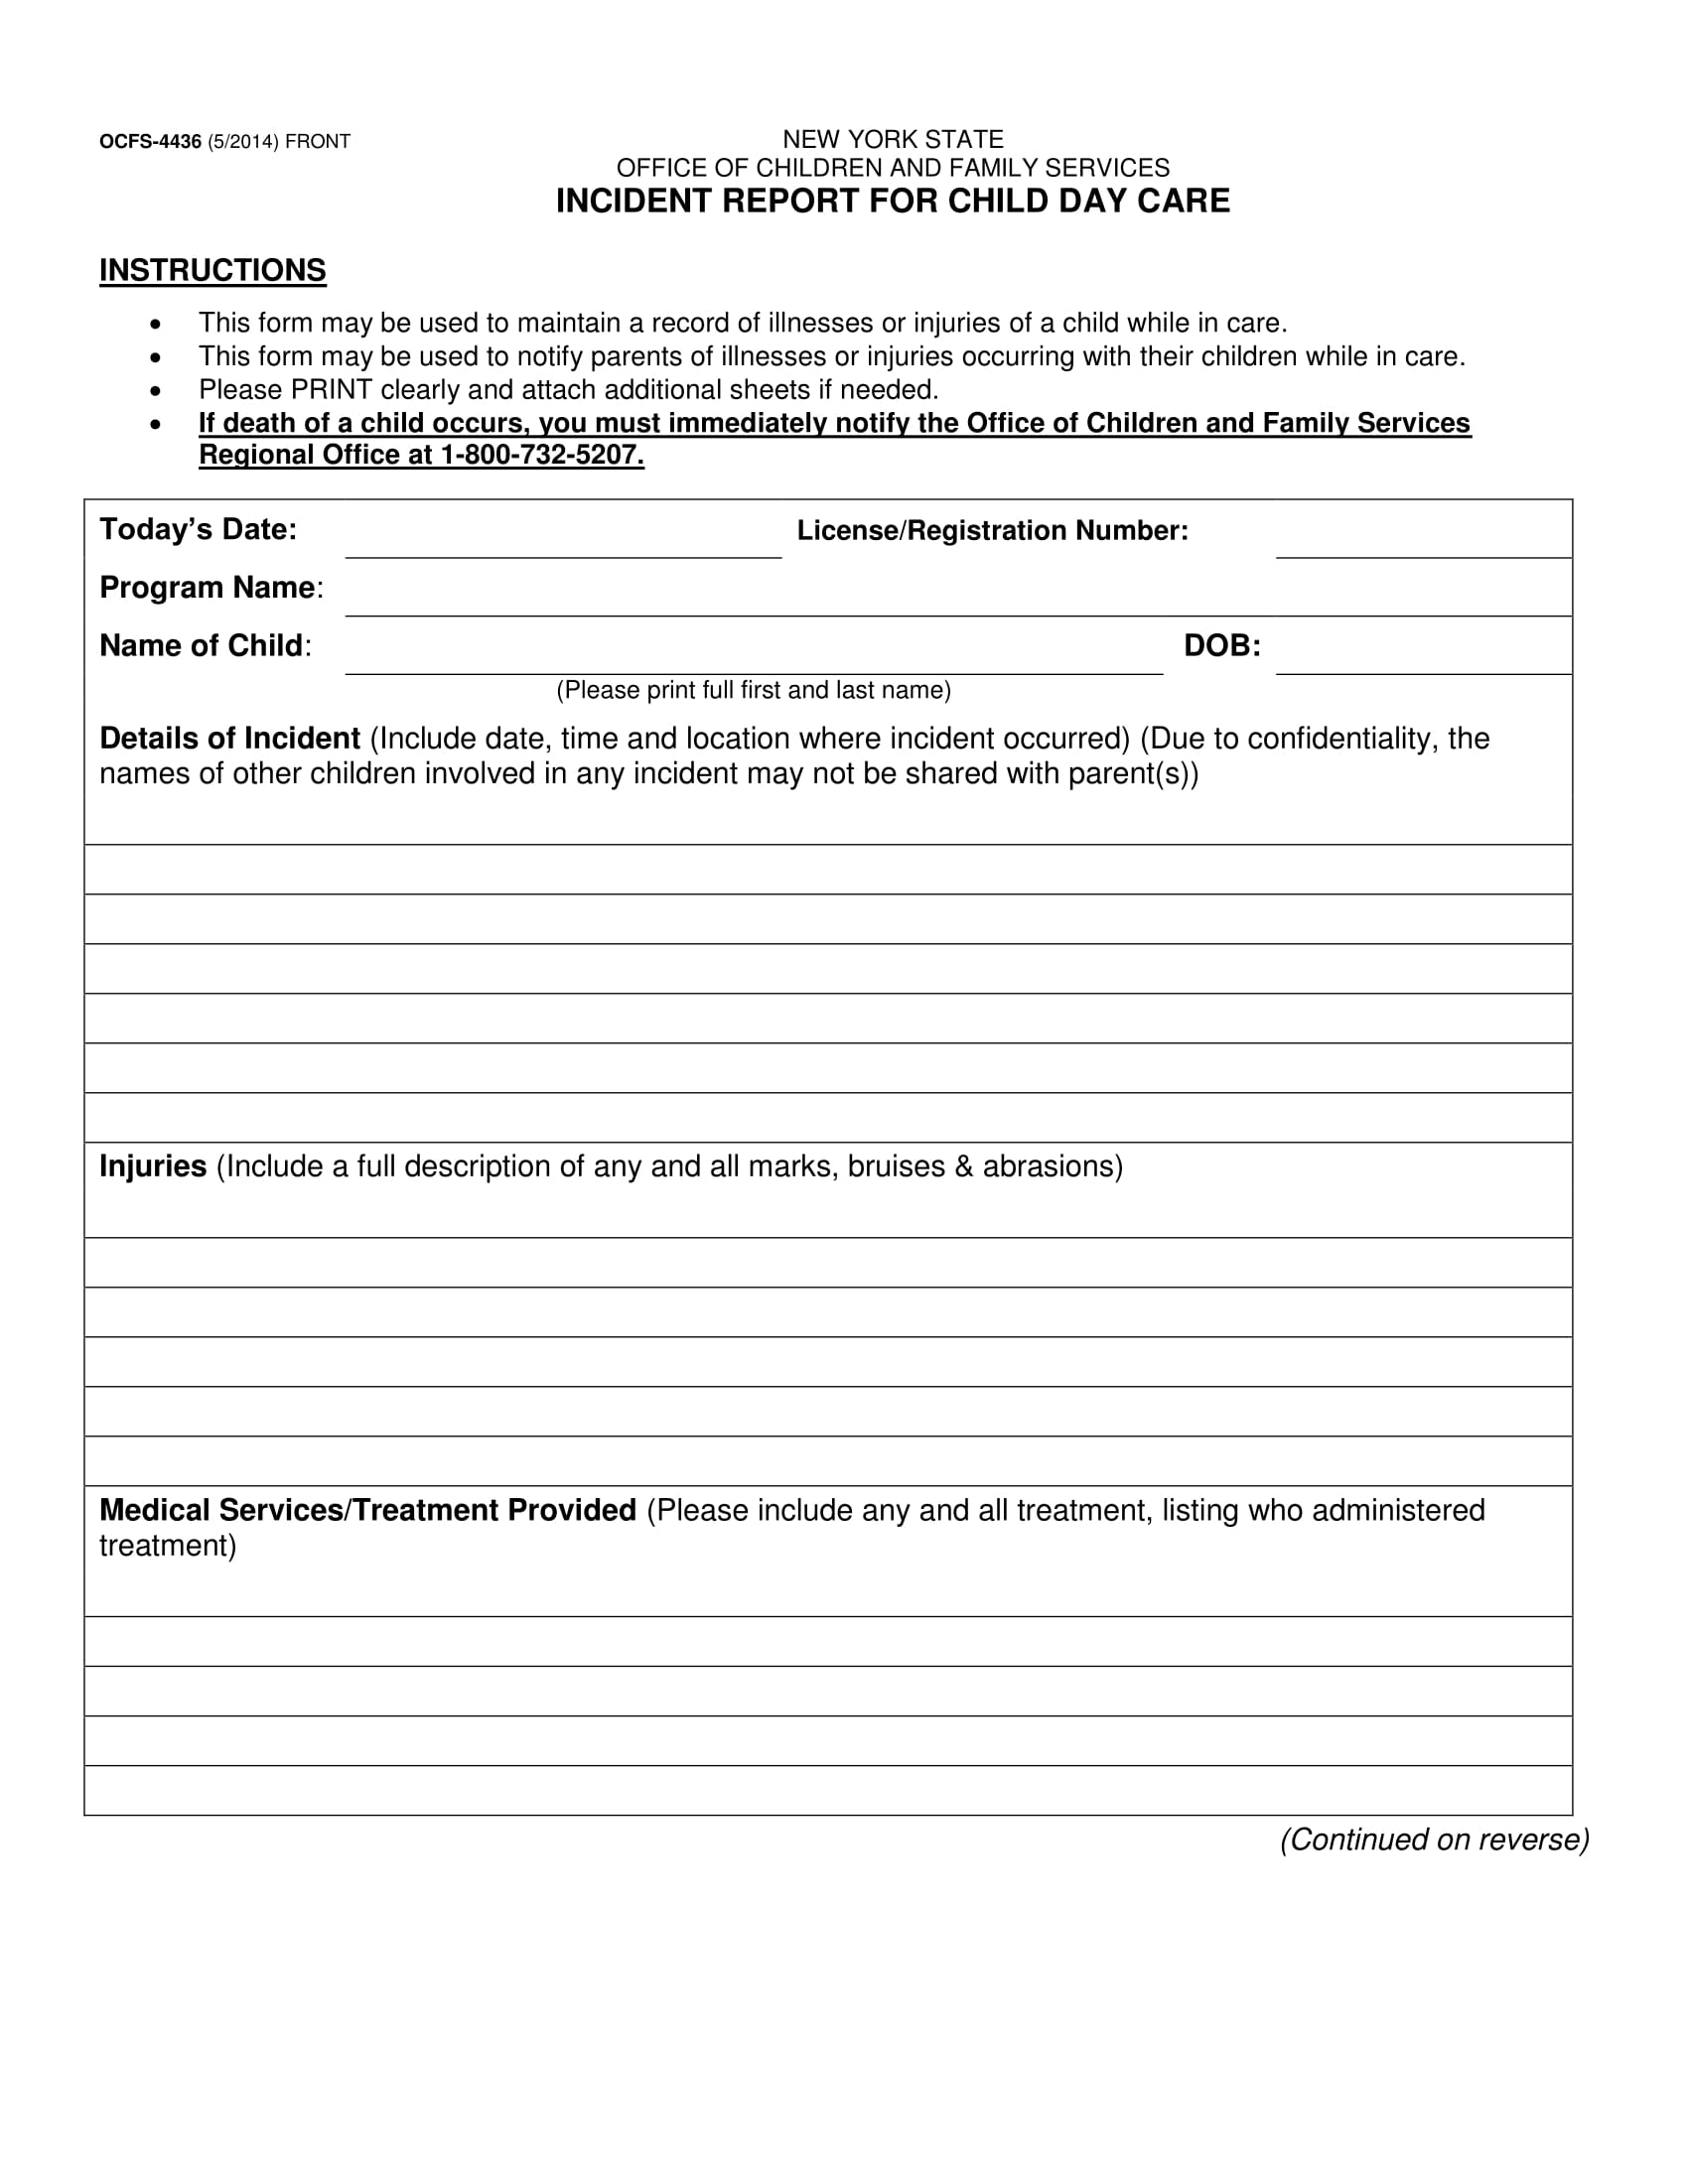 incident report for child daycare information form 1